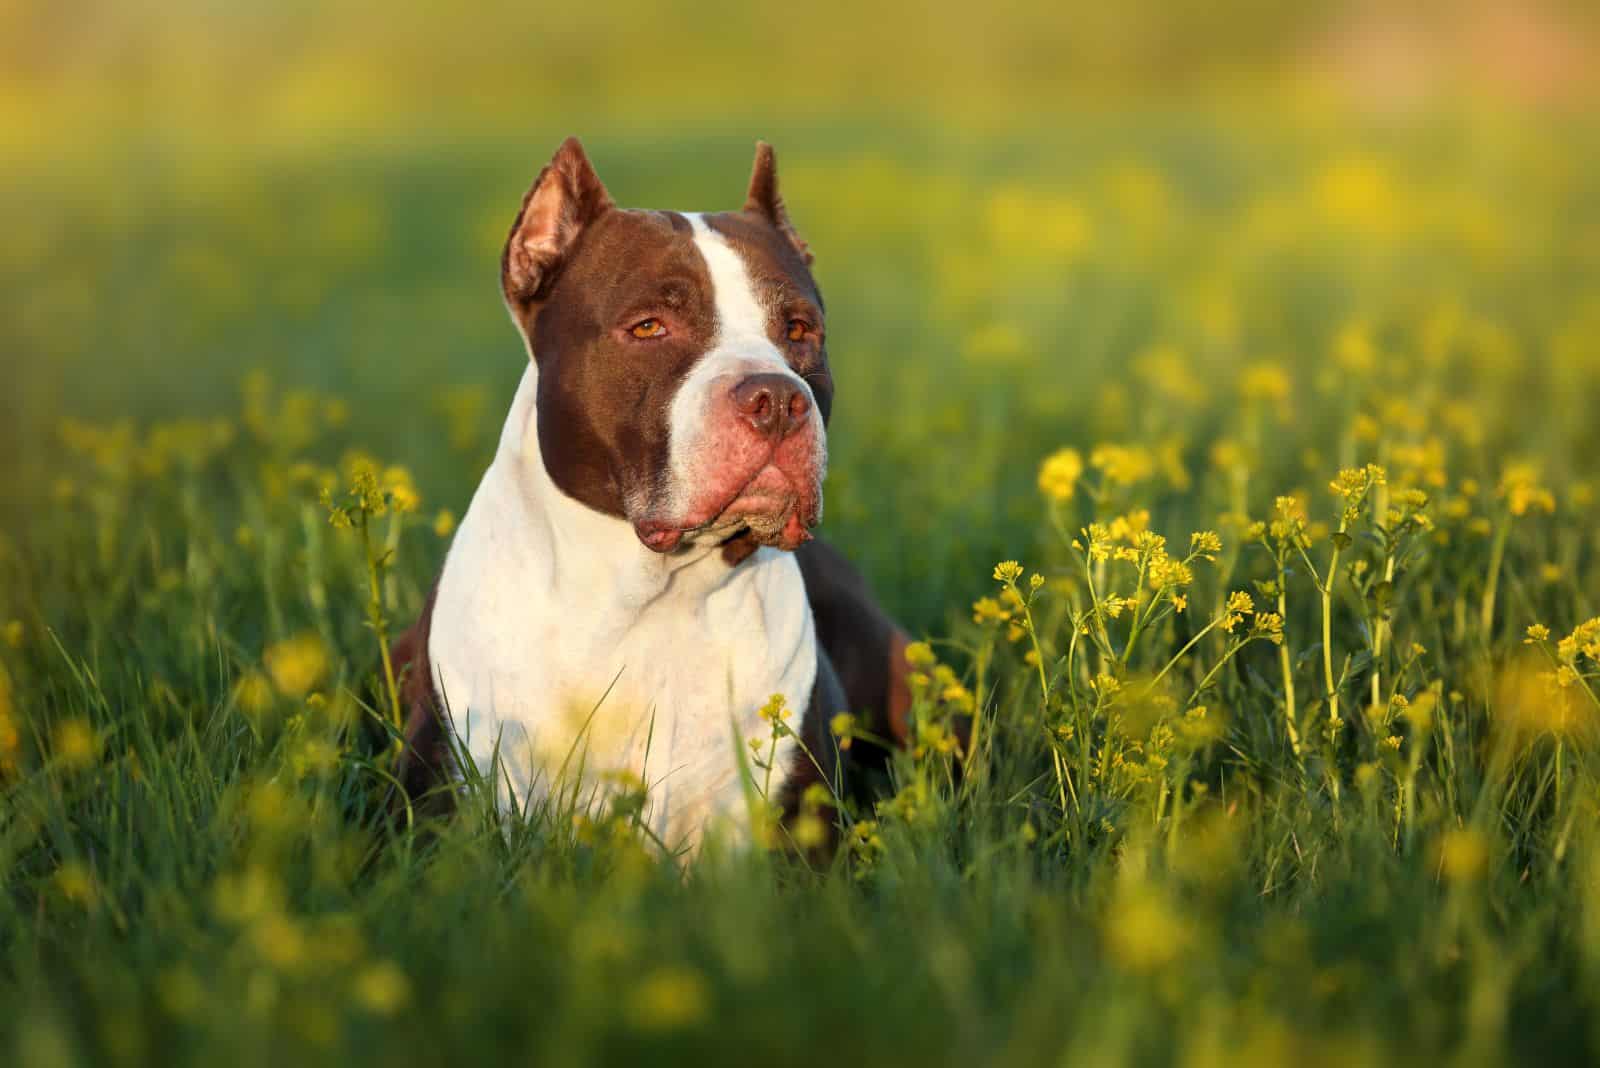 American Pitbull Terrier lies in the field